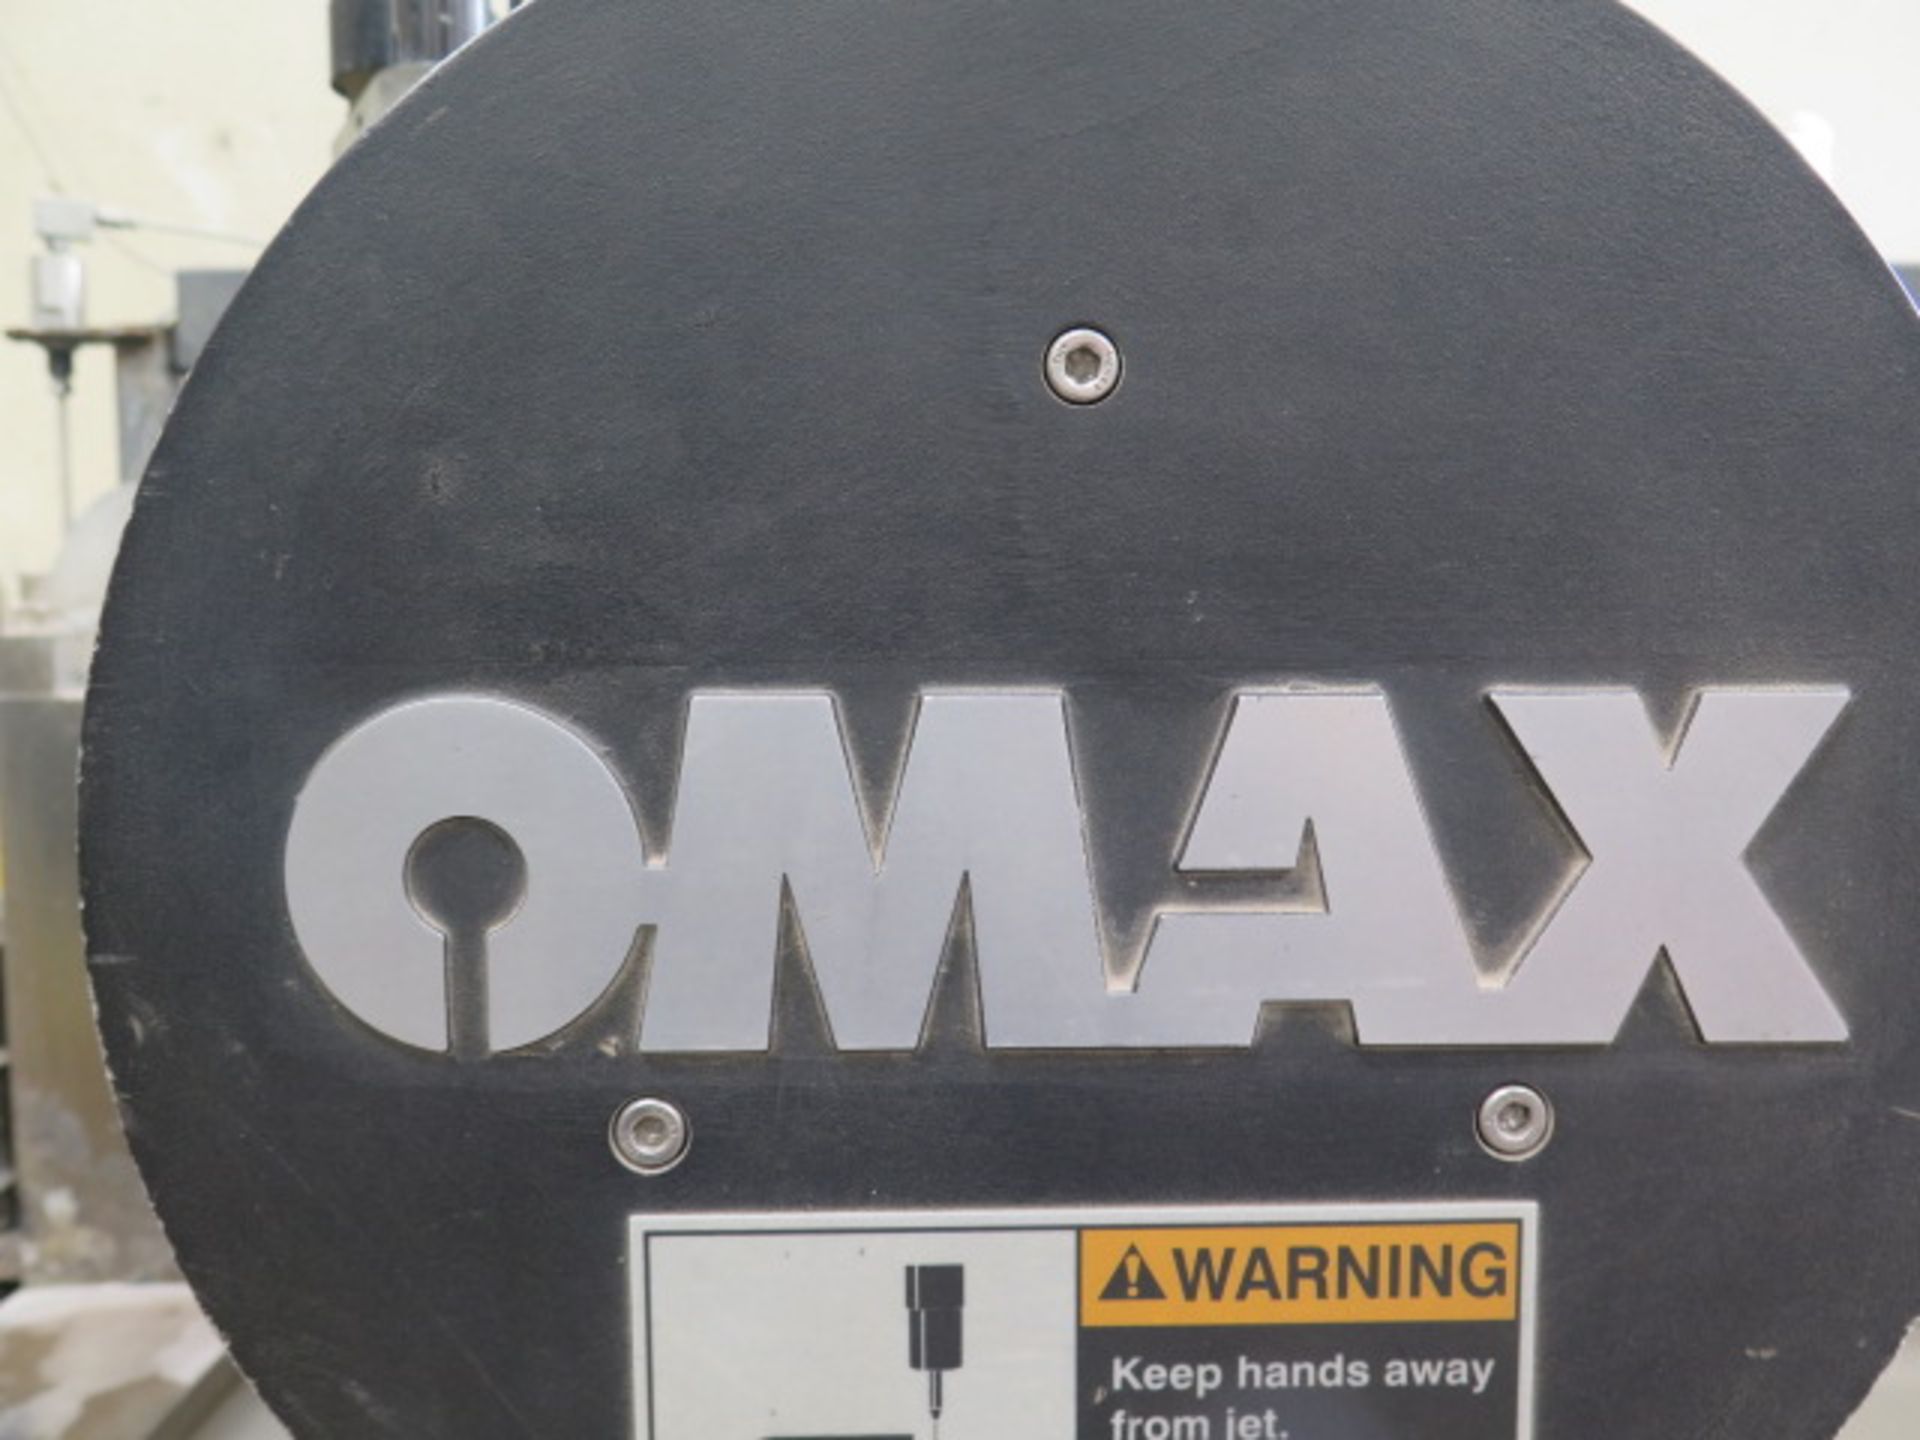 Omax mdl. 2652 2’ x 4’ CNC WaterJet Machine s/n B511824 w/ Omax MAKE Precision Velocity, SOLD AS IS - Image 16 of 17